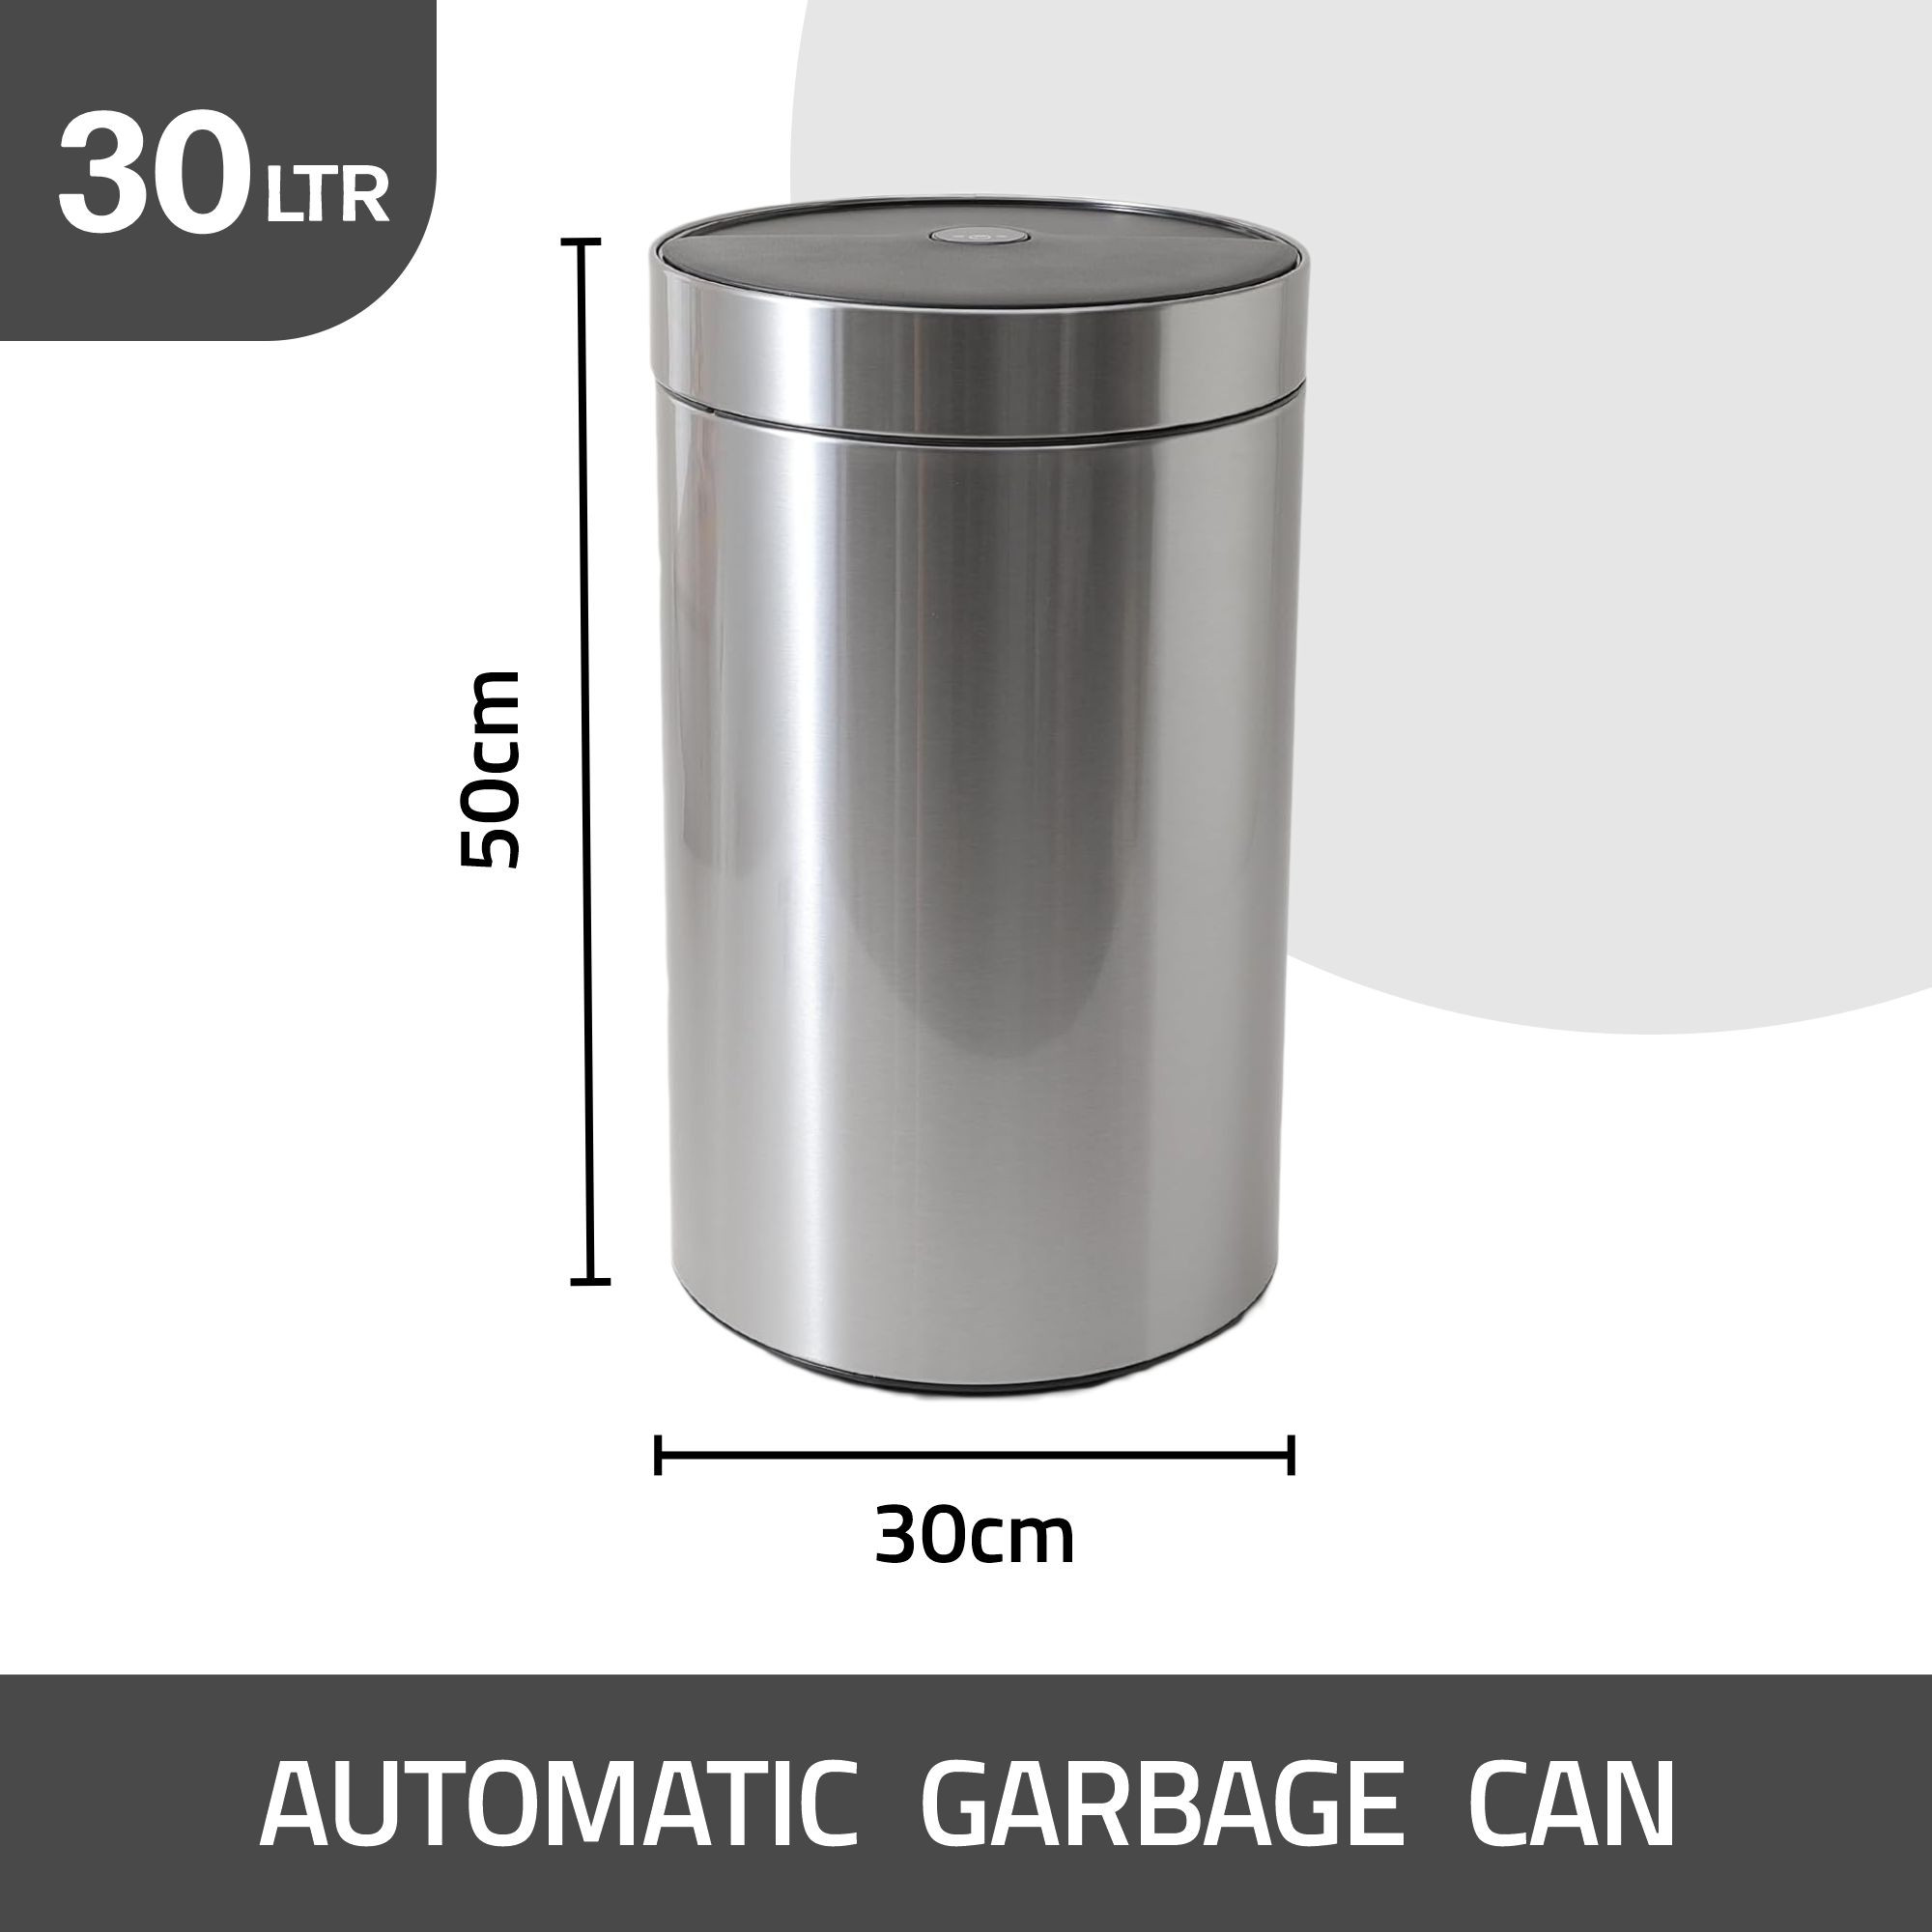 Kuber Industries Sensor Dustbin | Rotating Motion-Sensor Dustbin | Touchless Trash Can | Smart Dustbin for Bedroom-Office-Living Room | Automatic Garbage Can | HN-ZQ-S -30L | Silver